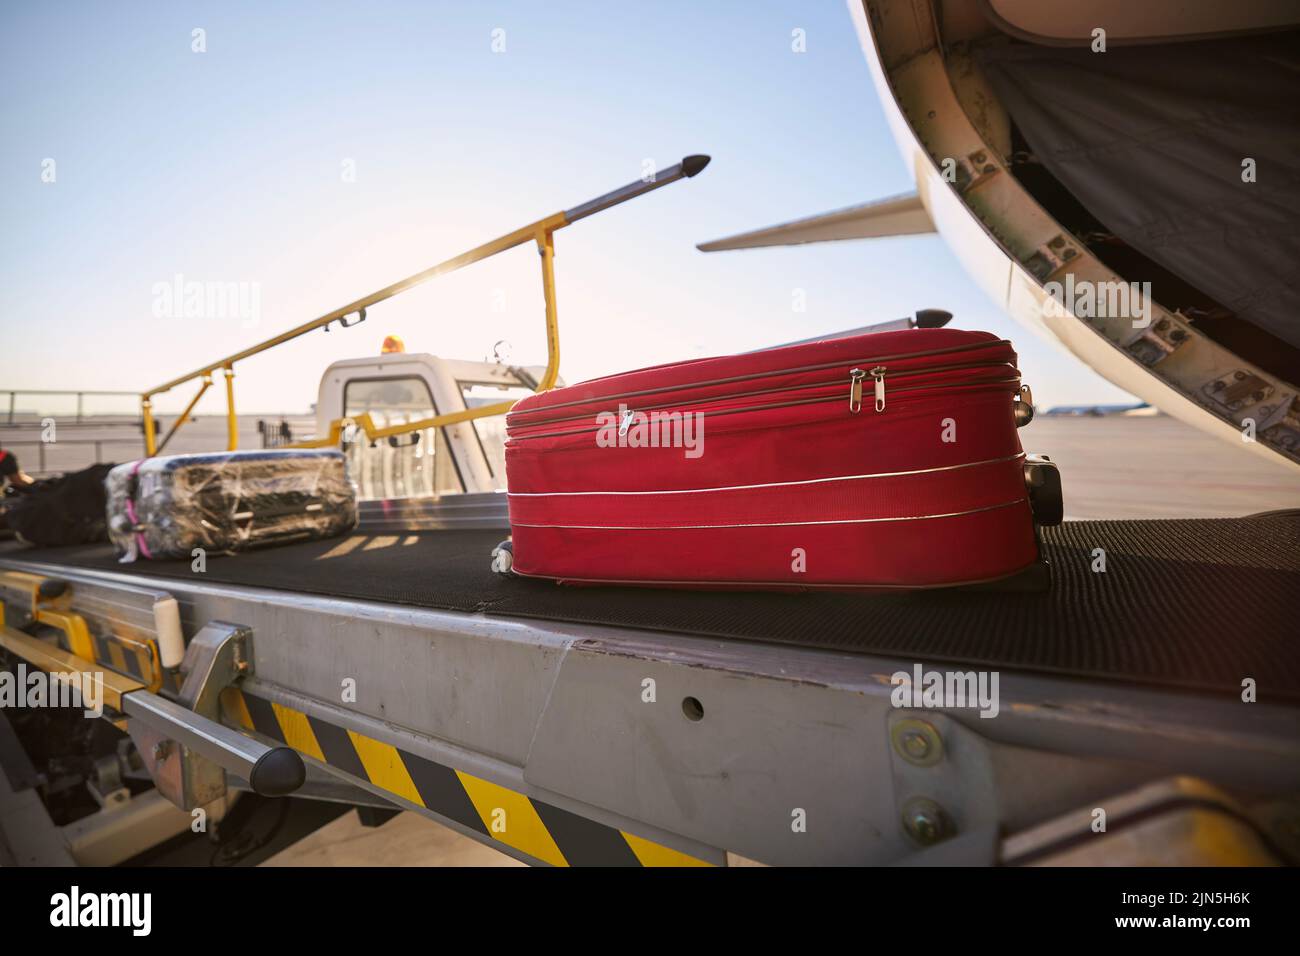 Loading of luggage to airplane. Red suitcase on conveyor belt at airport. Stock Photo